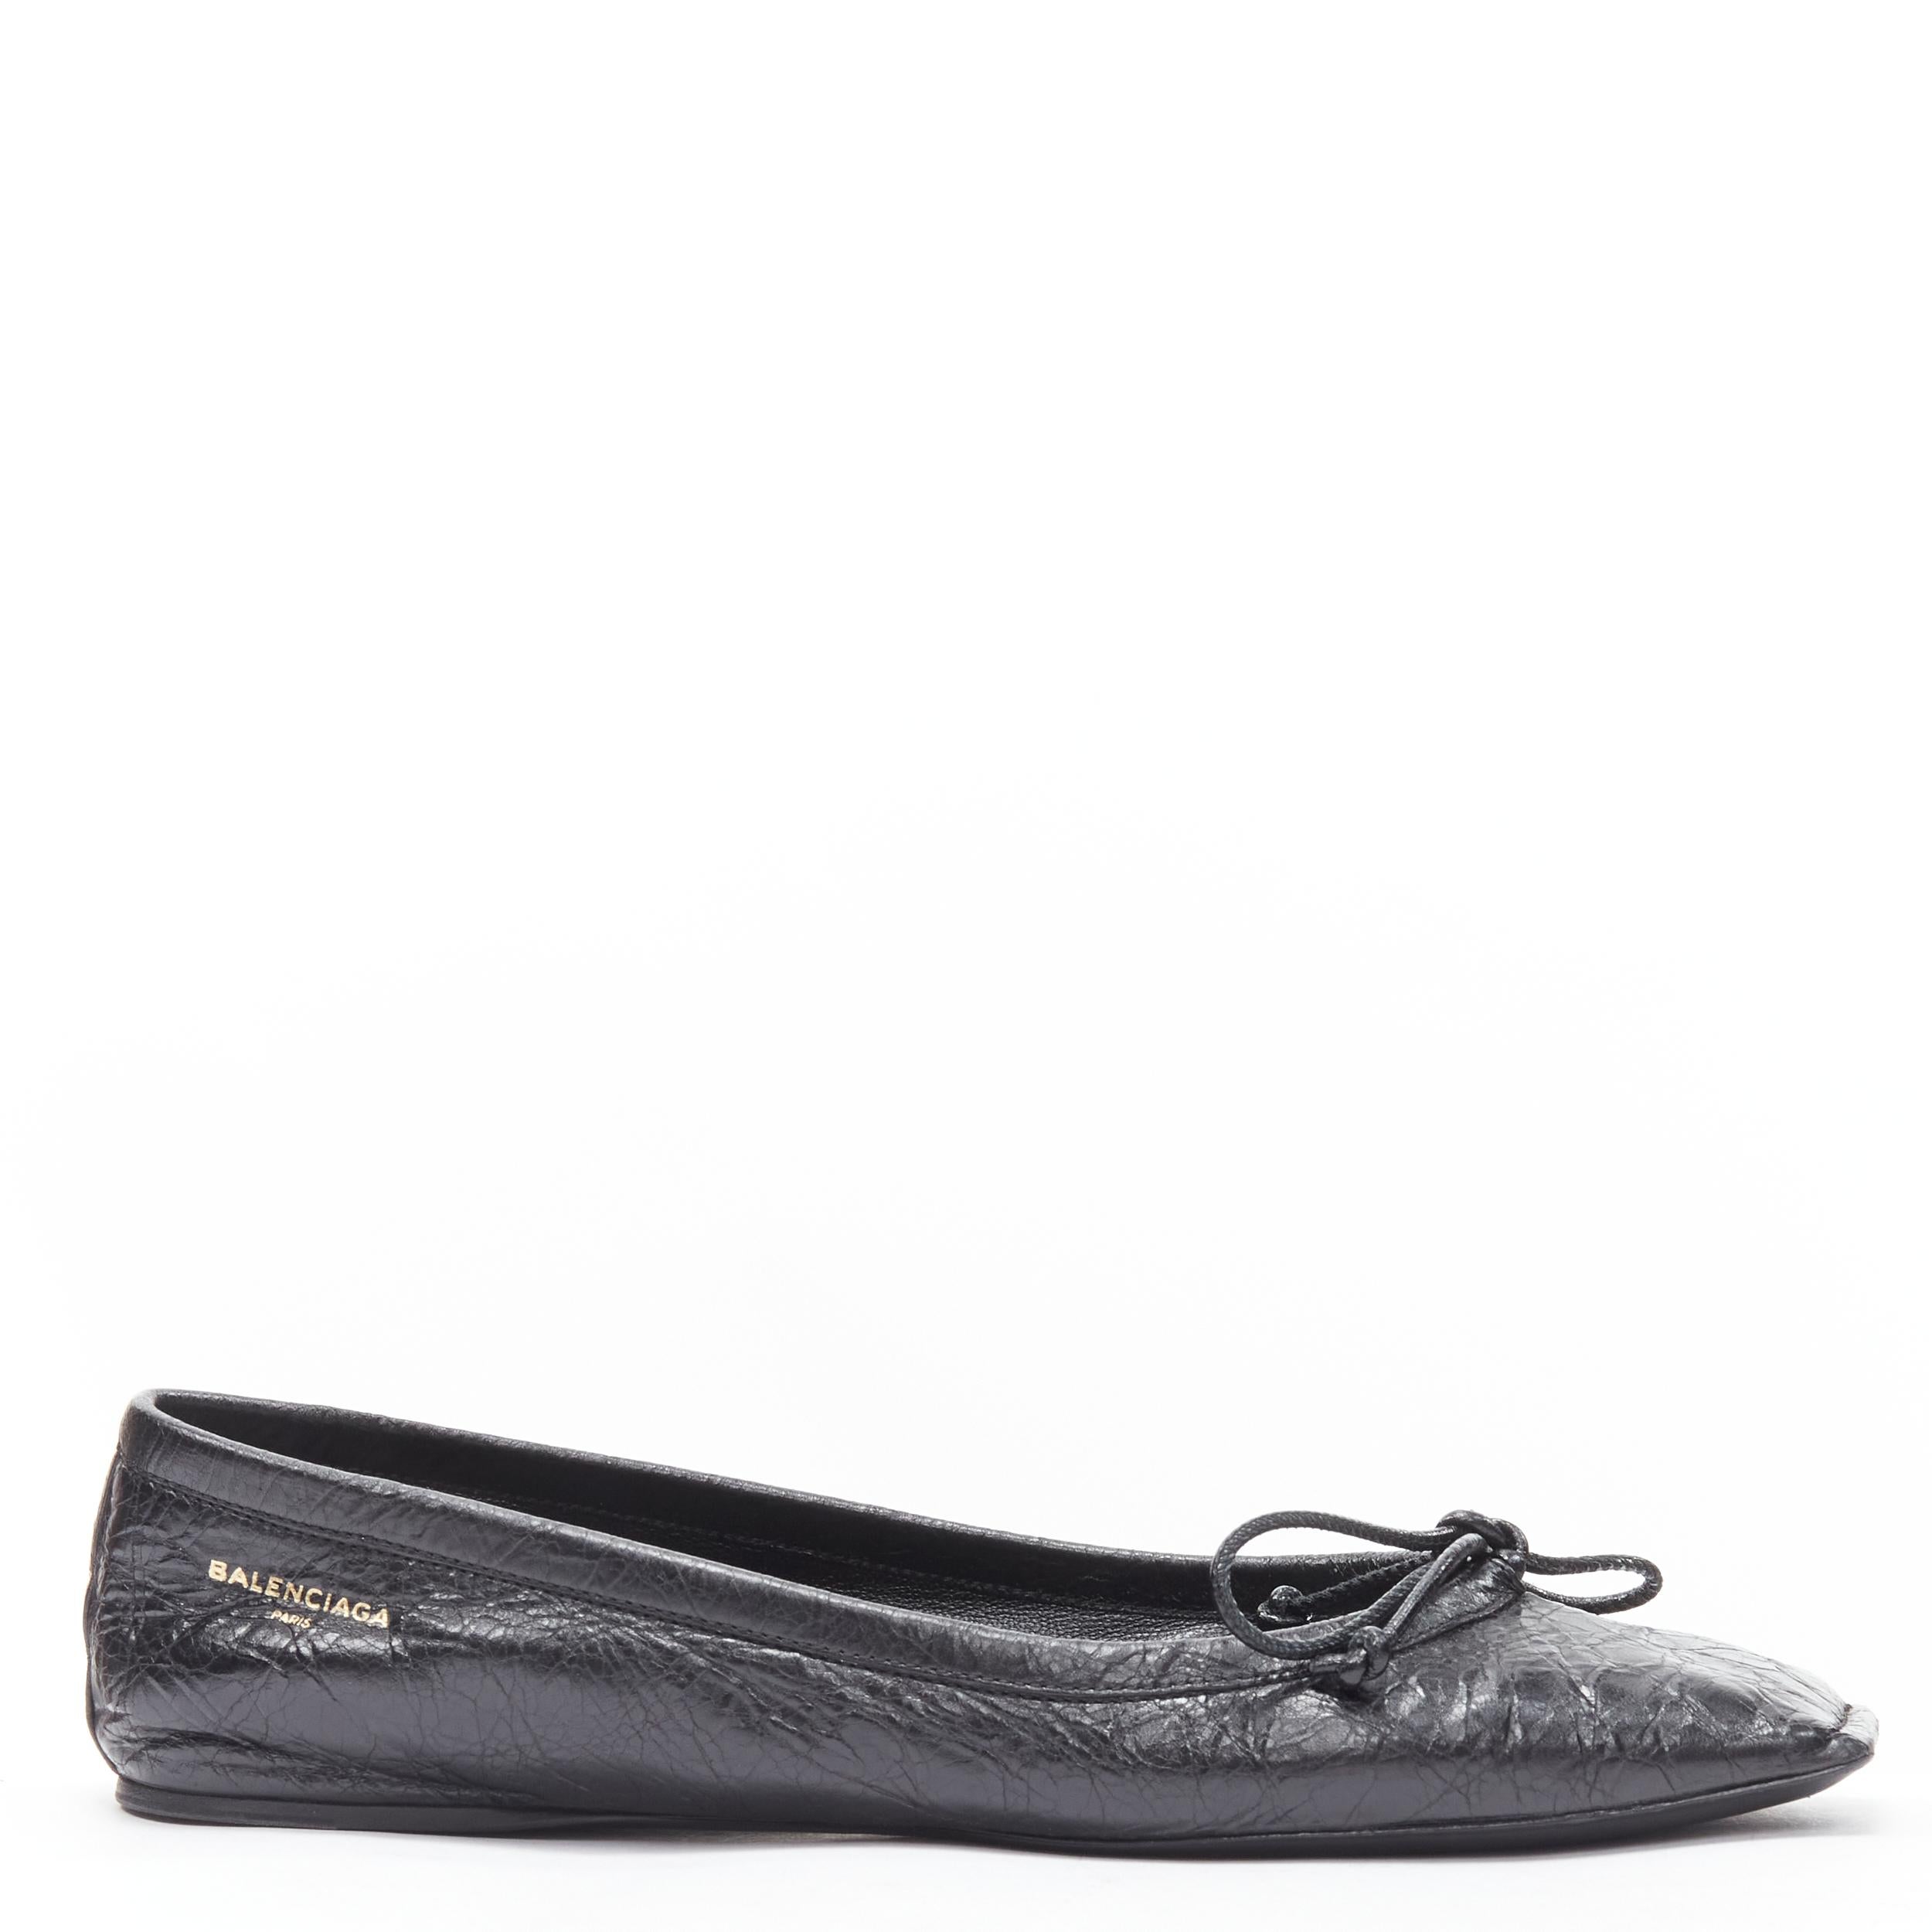 BALENCIAGA Demna black Arena crinkled leather square toe ballerina flats EU37 
Reference: MELK/A00228 
Brand: Balenciaga 
Designer: Demna 
Material: Leather 
Color: Black 
Pattern: Solid 
Extra Detail: Square toe 
Made in: Italy 

CONDITION: